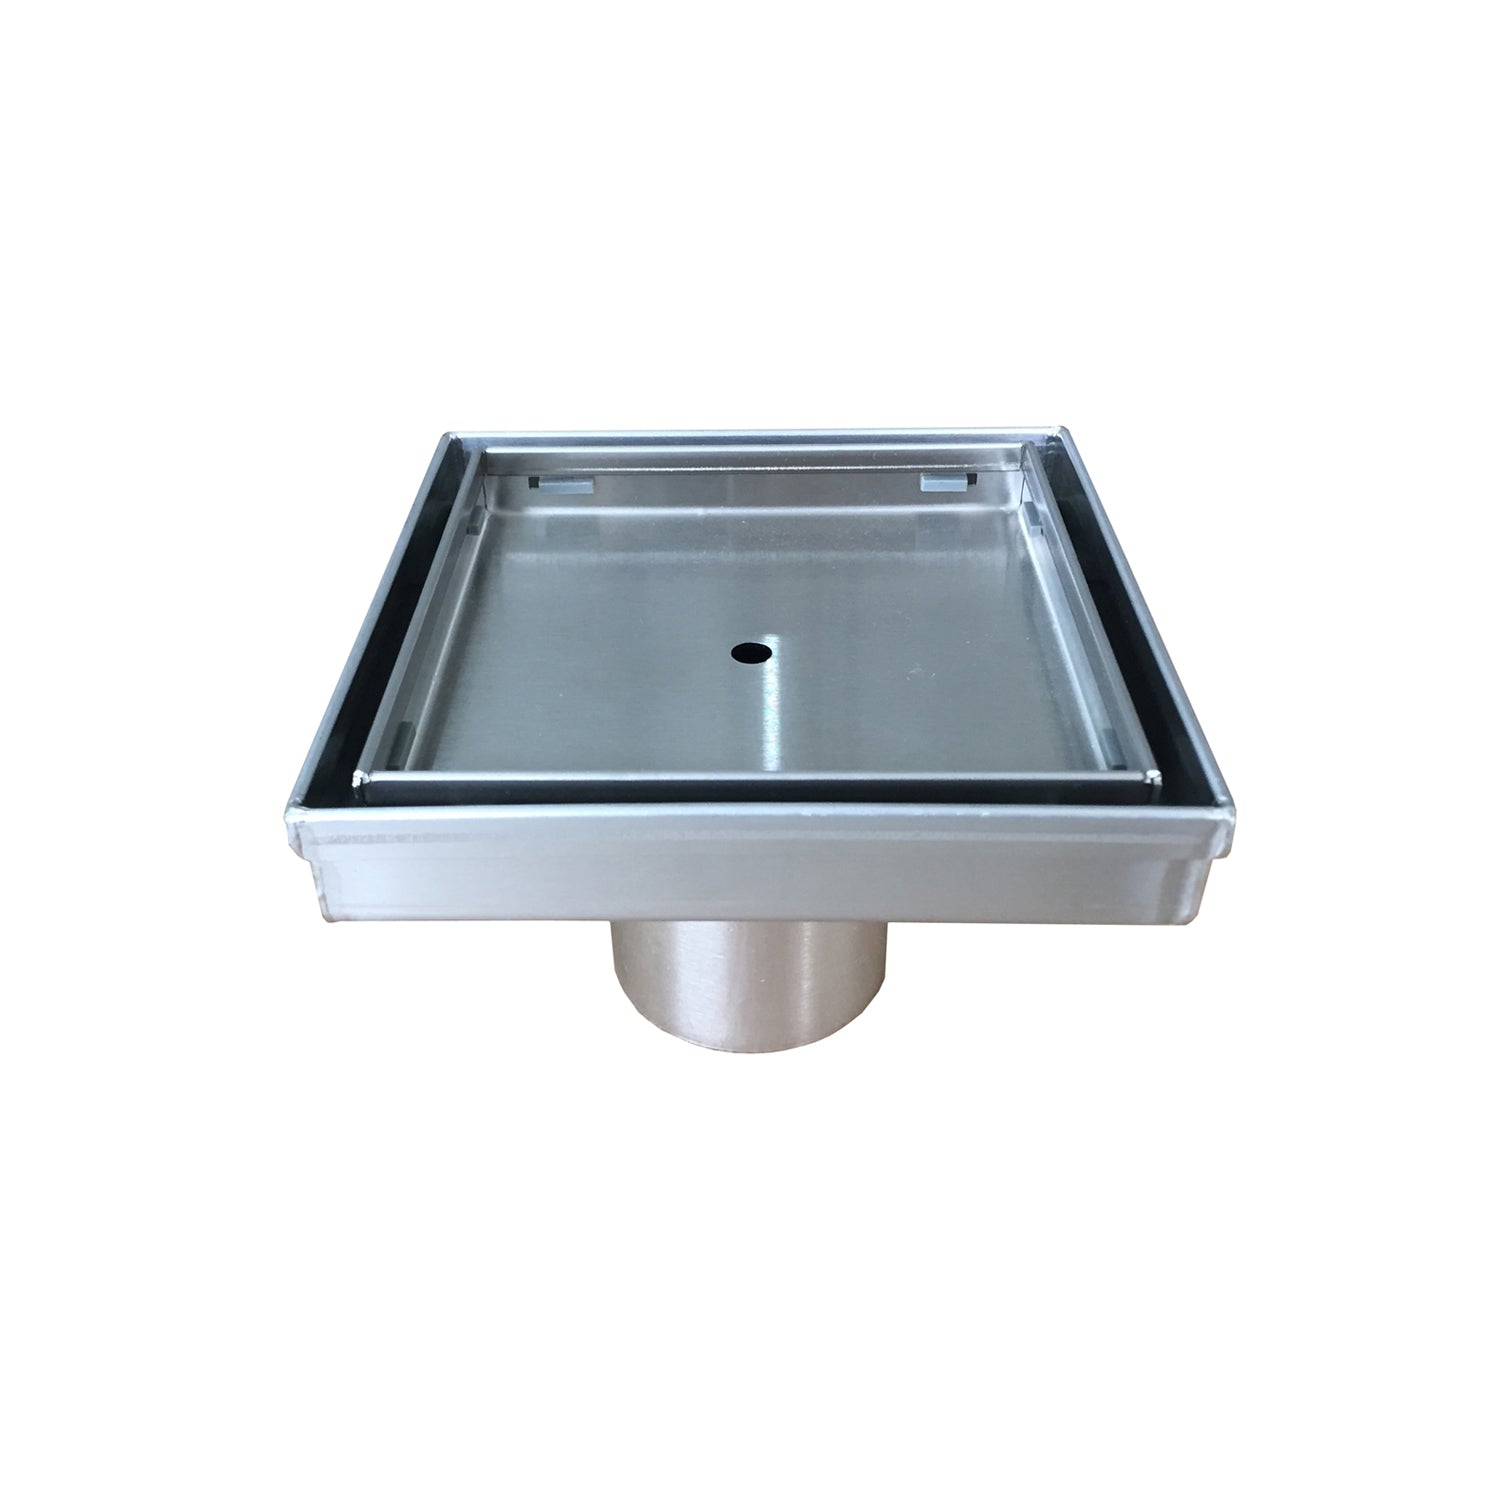 DAX Square Shower Floor Drain, Stainless Steel Body, Brushed Stainless Steel Finish, 4 x 4 Inches (RTZS3T01)